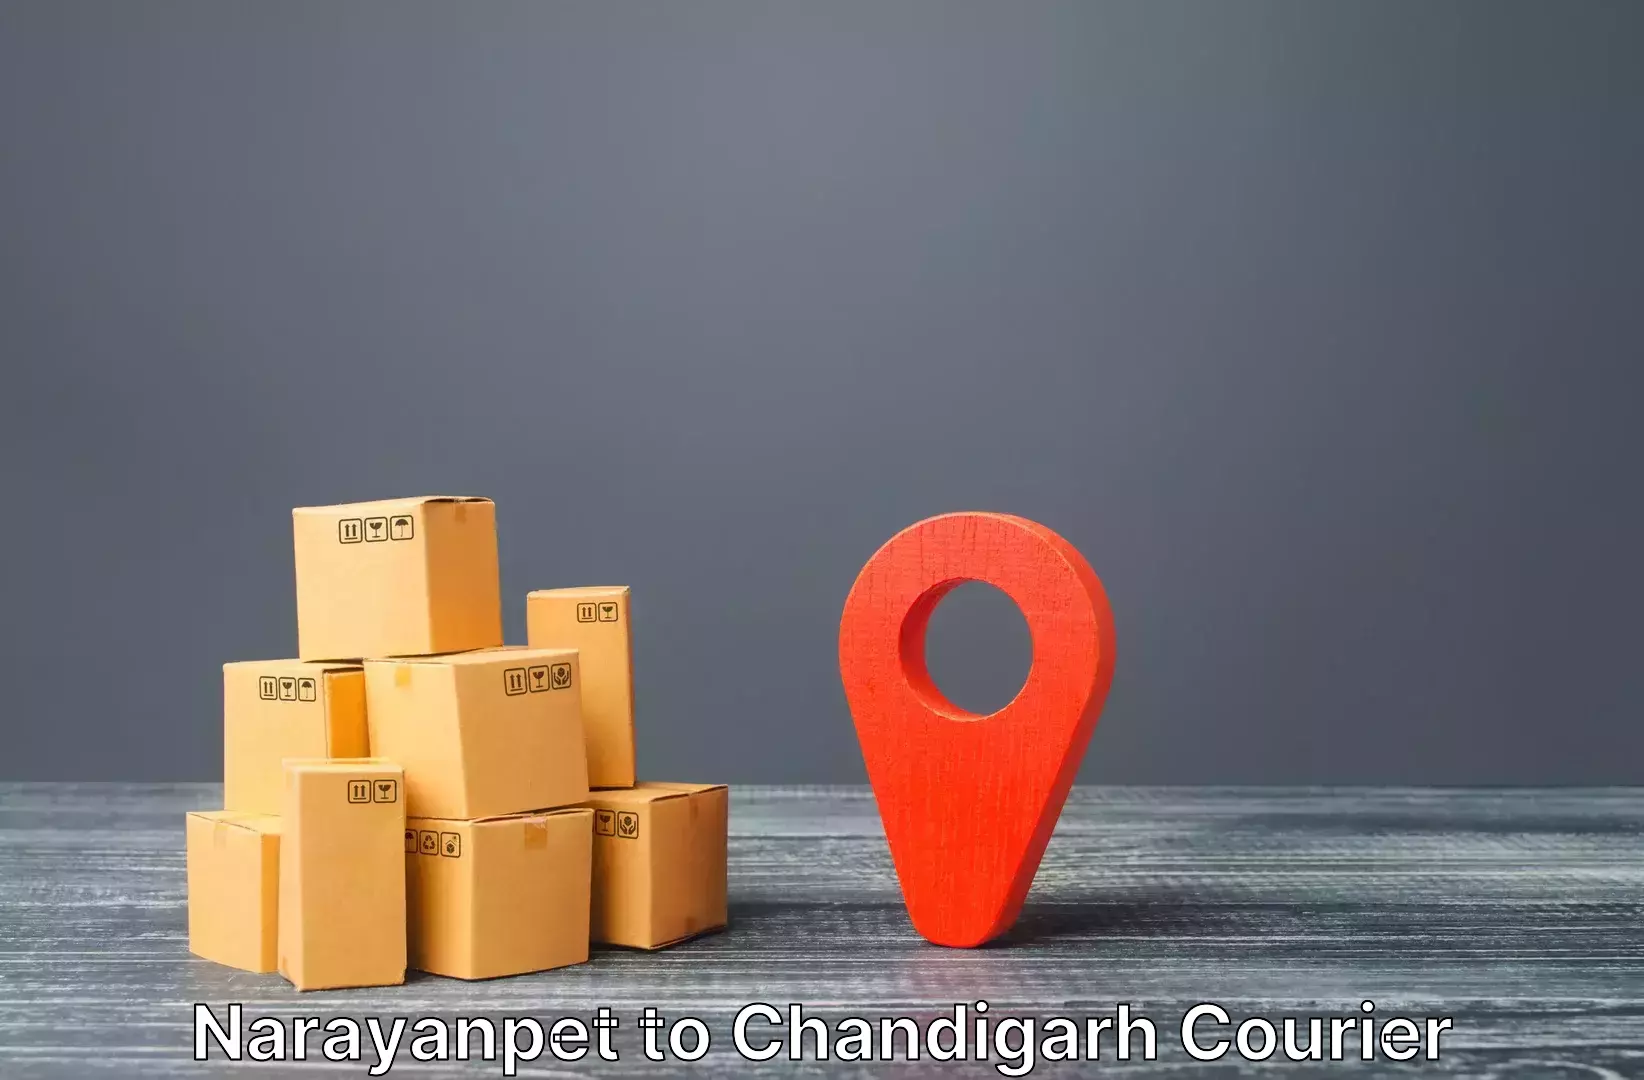 Nationwide luggage courier Narayanpet to Chandigarh